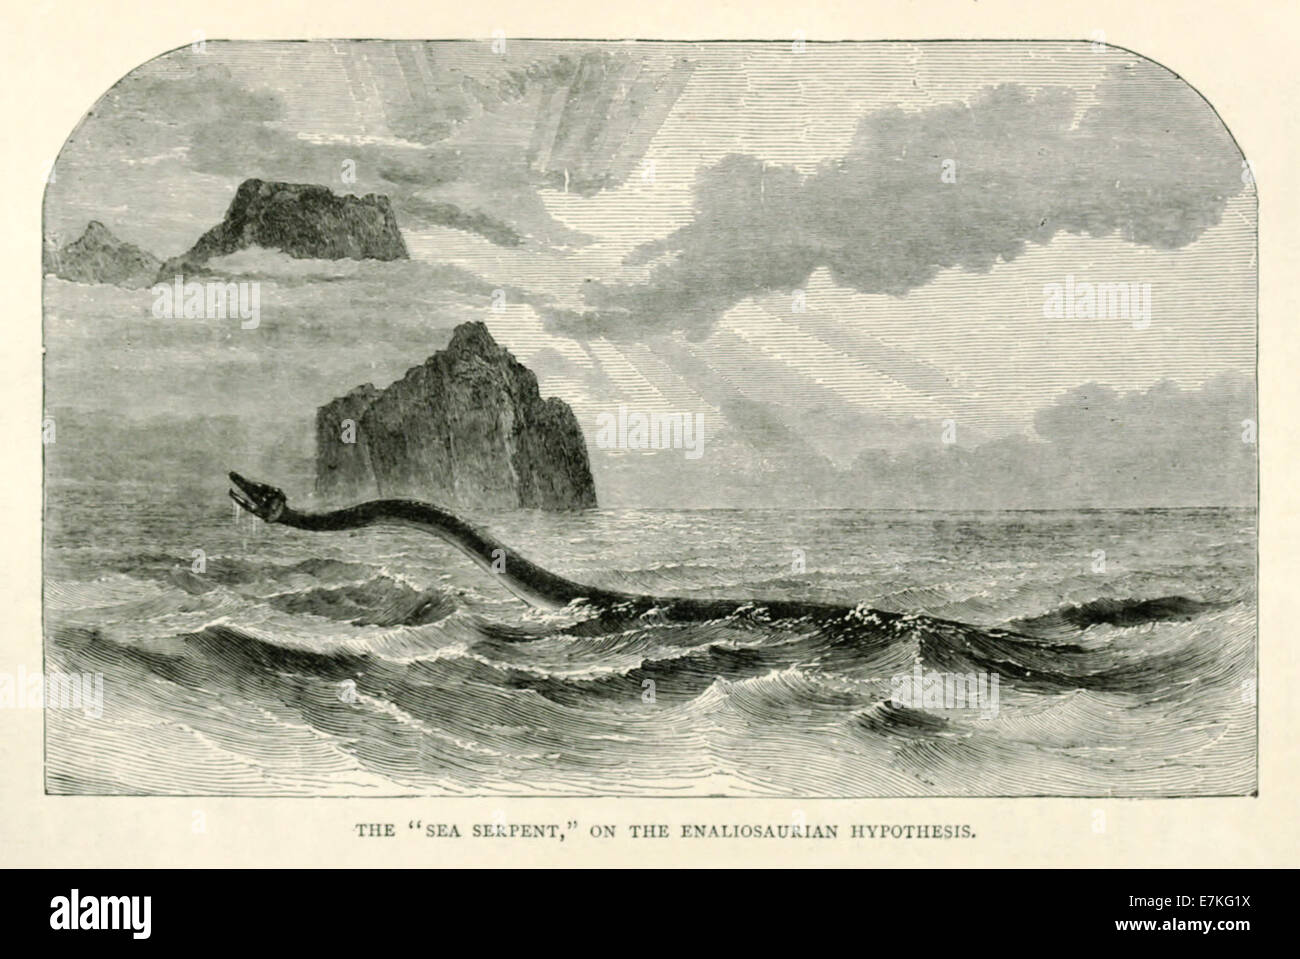 Sea serpent, illustration of the surviving dinosaur as explanation of sightings. See description for further information. Stock Photo